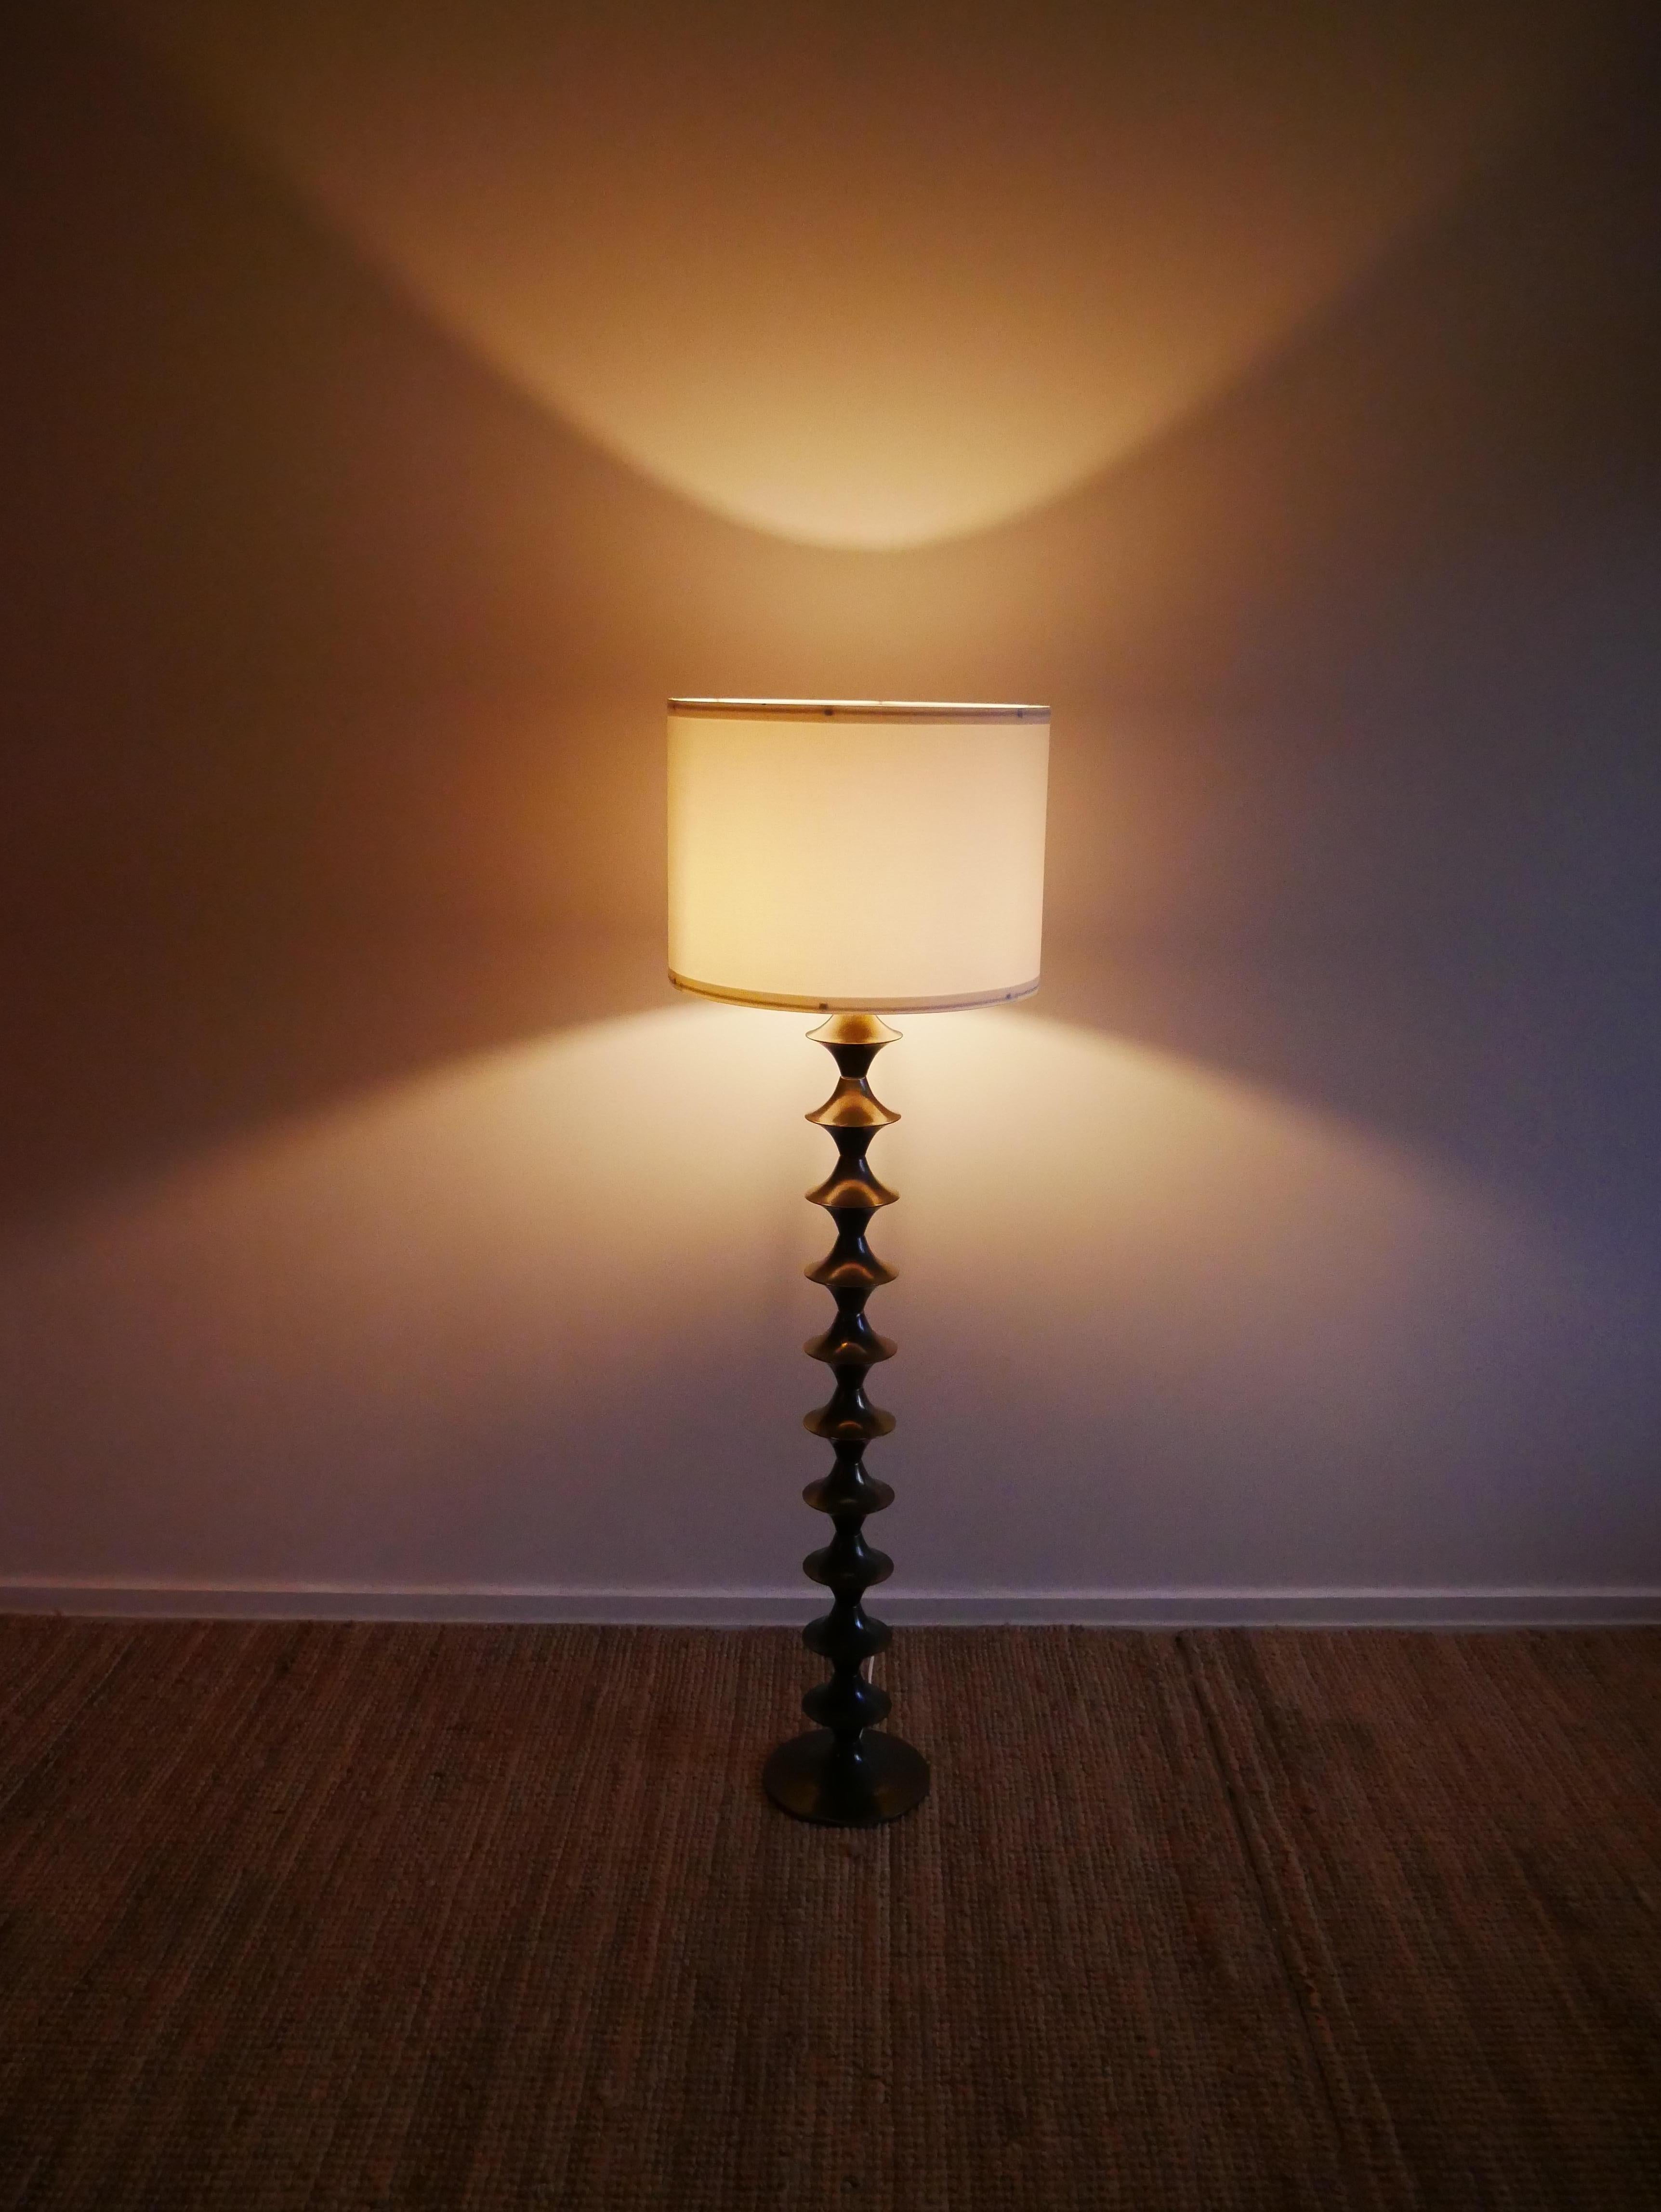 Mid-20th Century Elit AB Floor Lamp, made in Sweden 1960's. For Sale